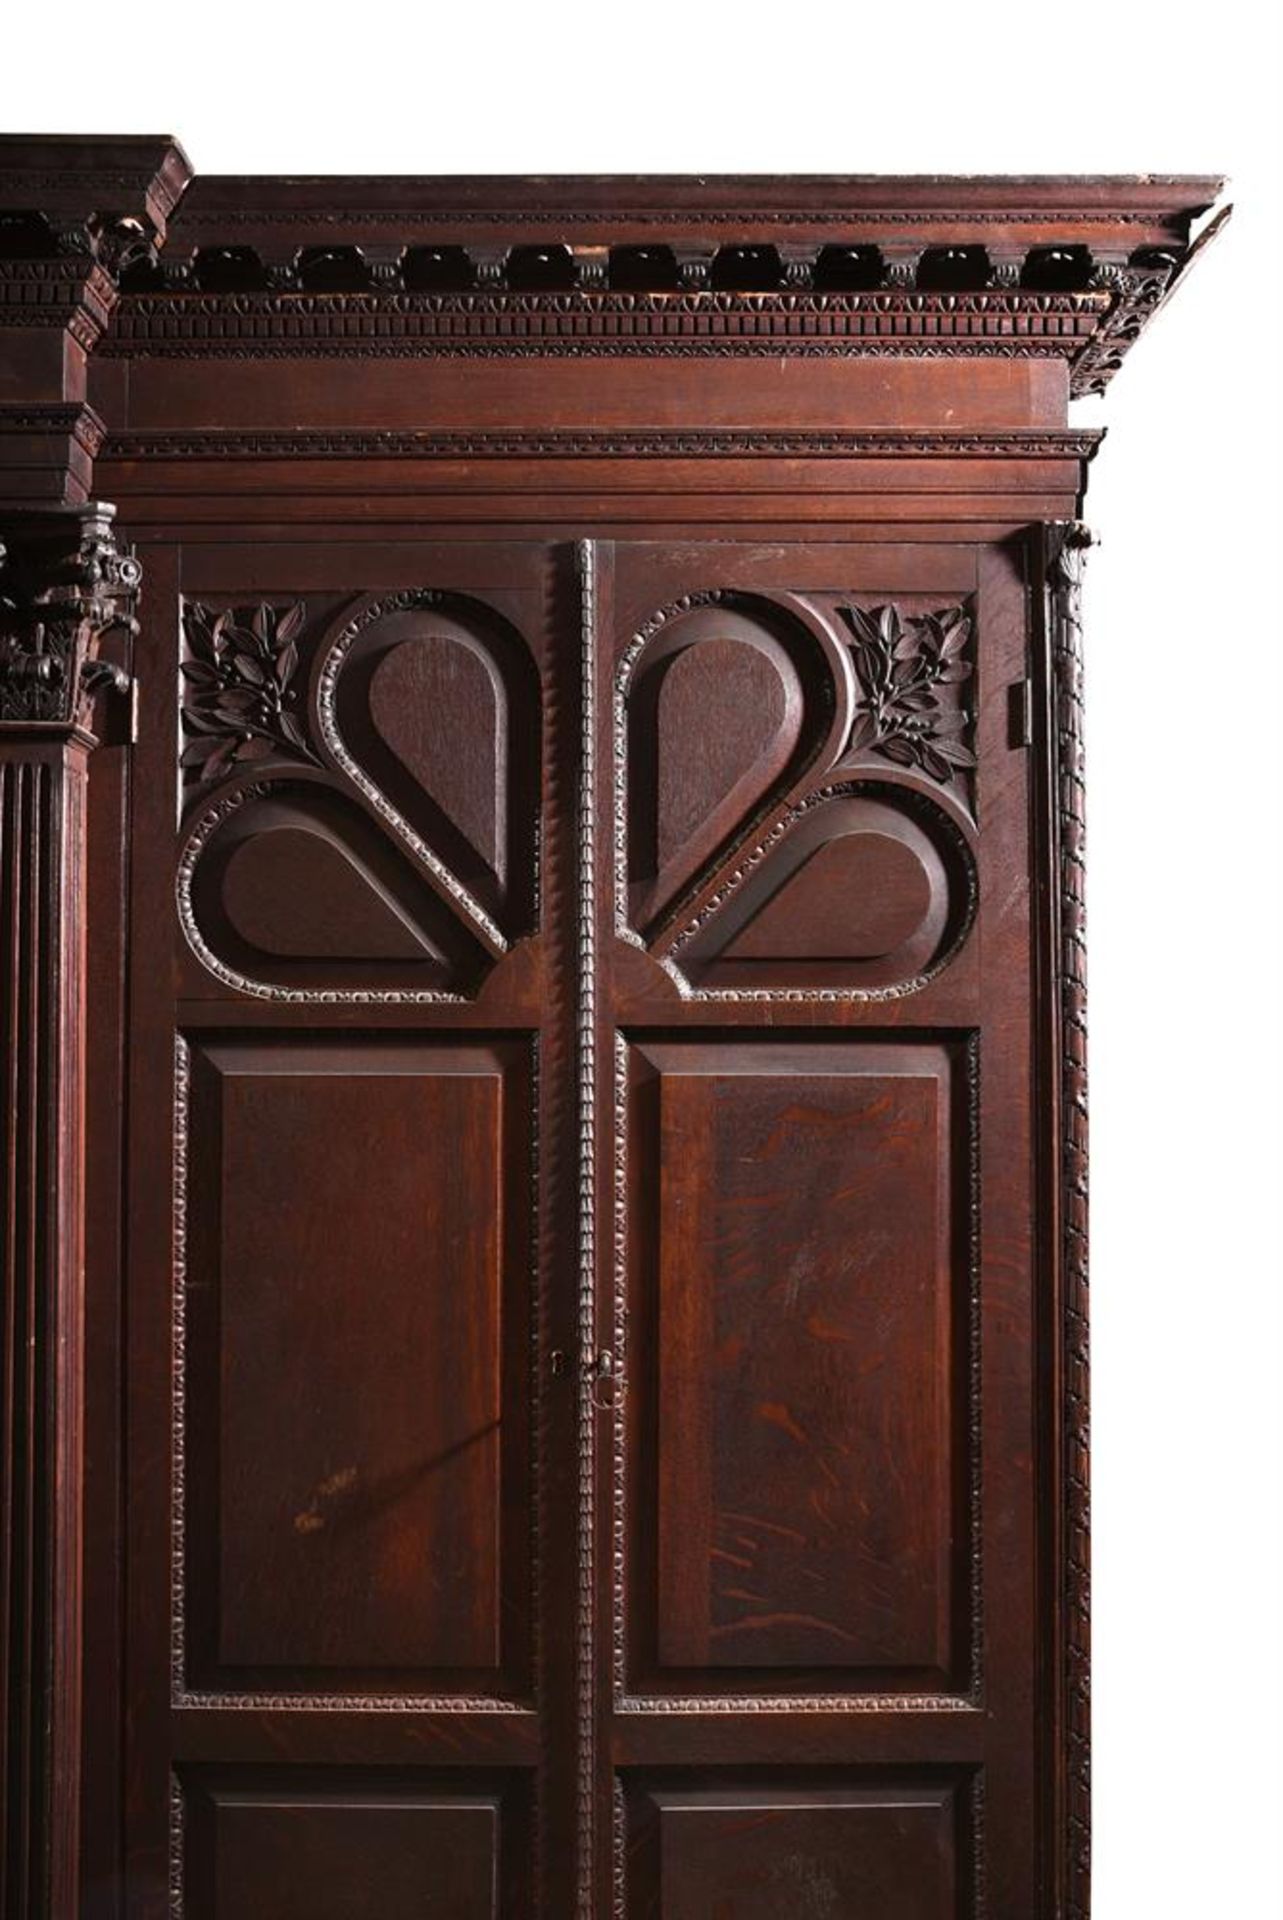 A RARE GEORGE II CARVED OAK BREAKFRONT BOOKCASE, CIRCA 1740 - Image 2 of 8